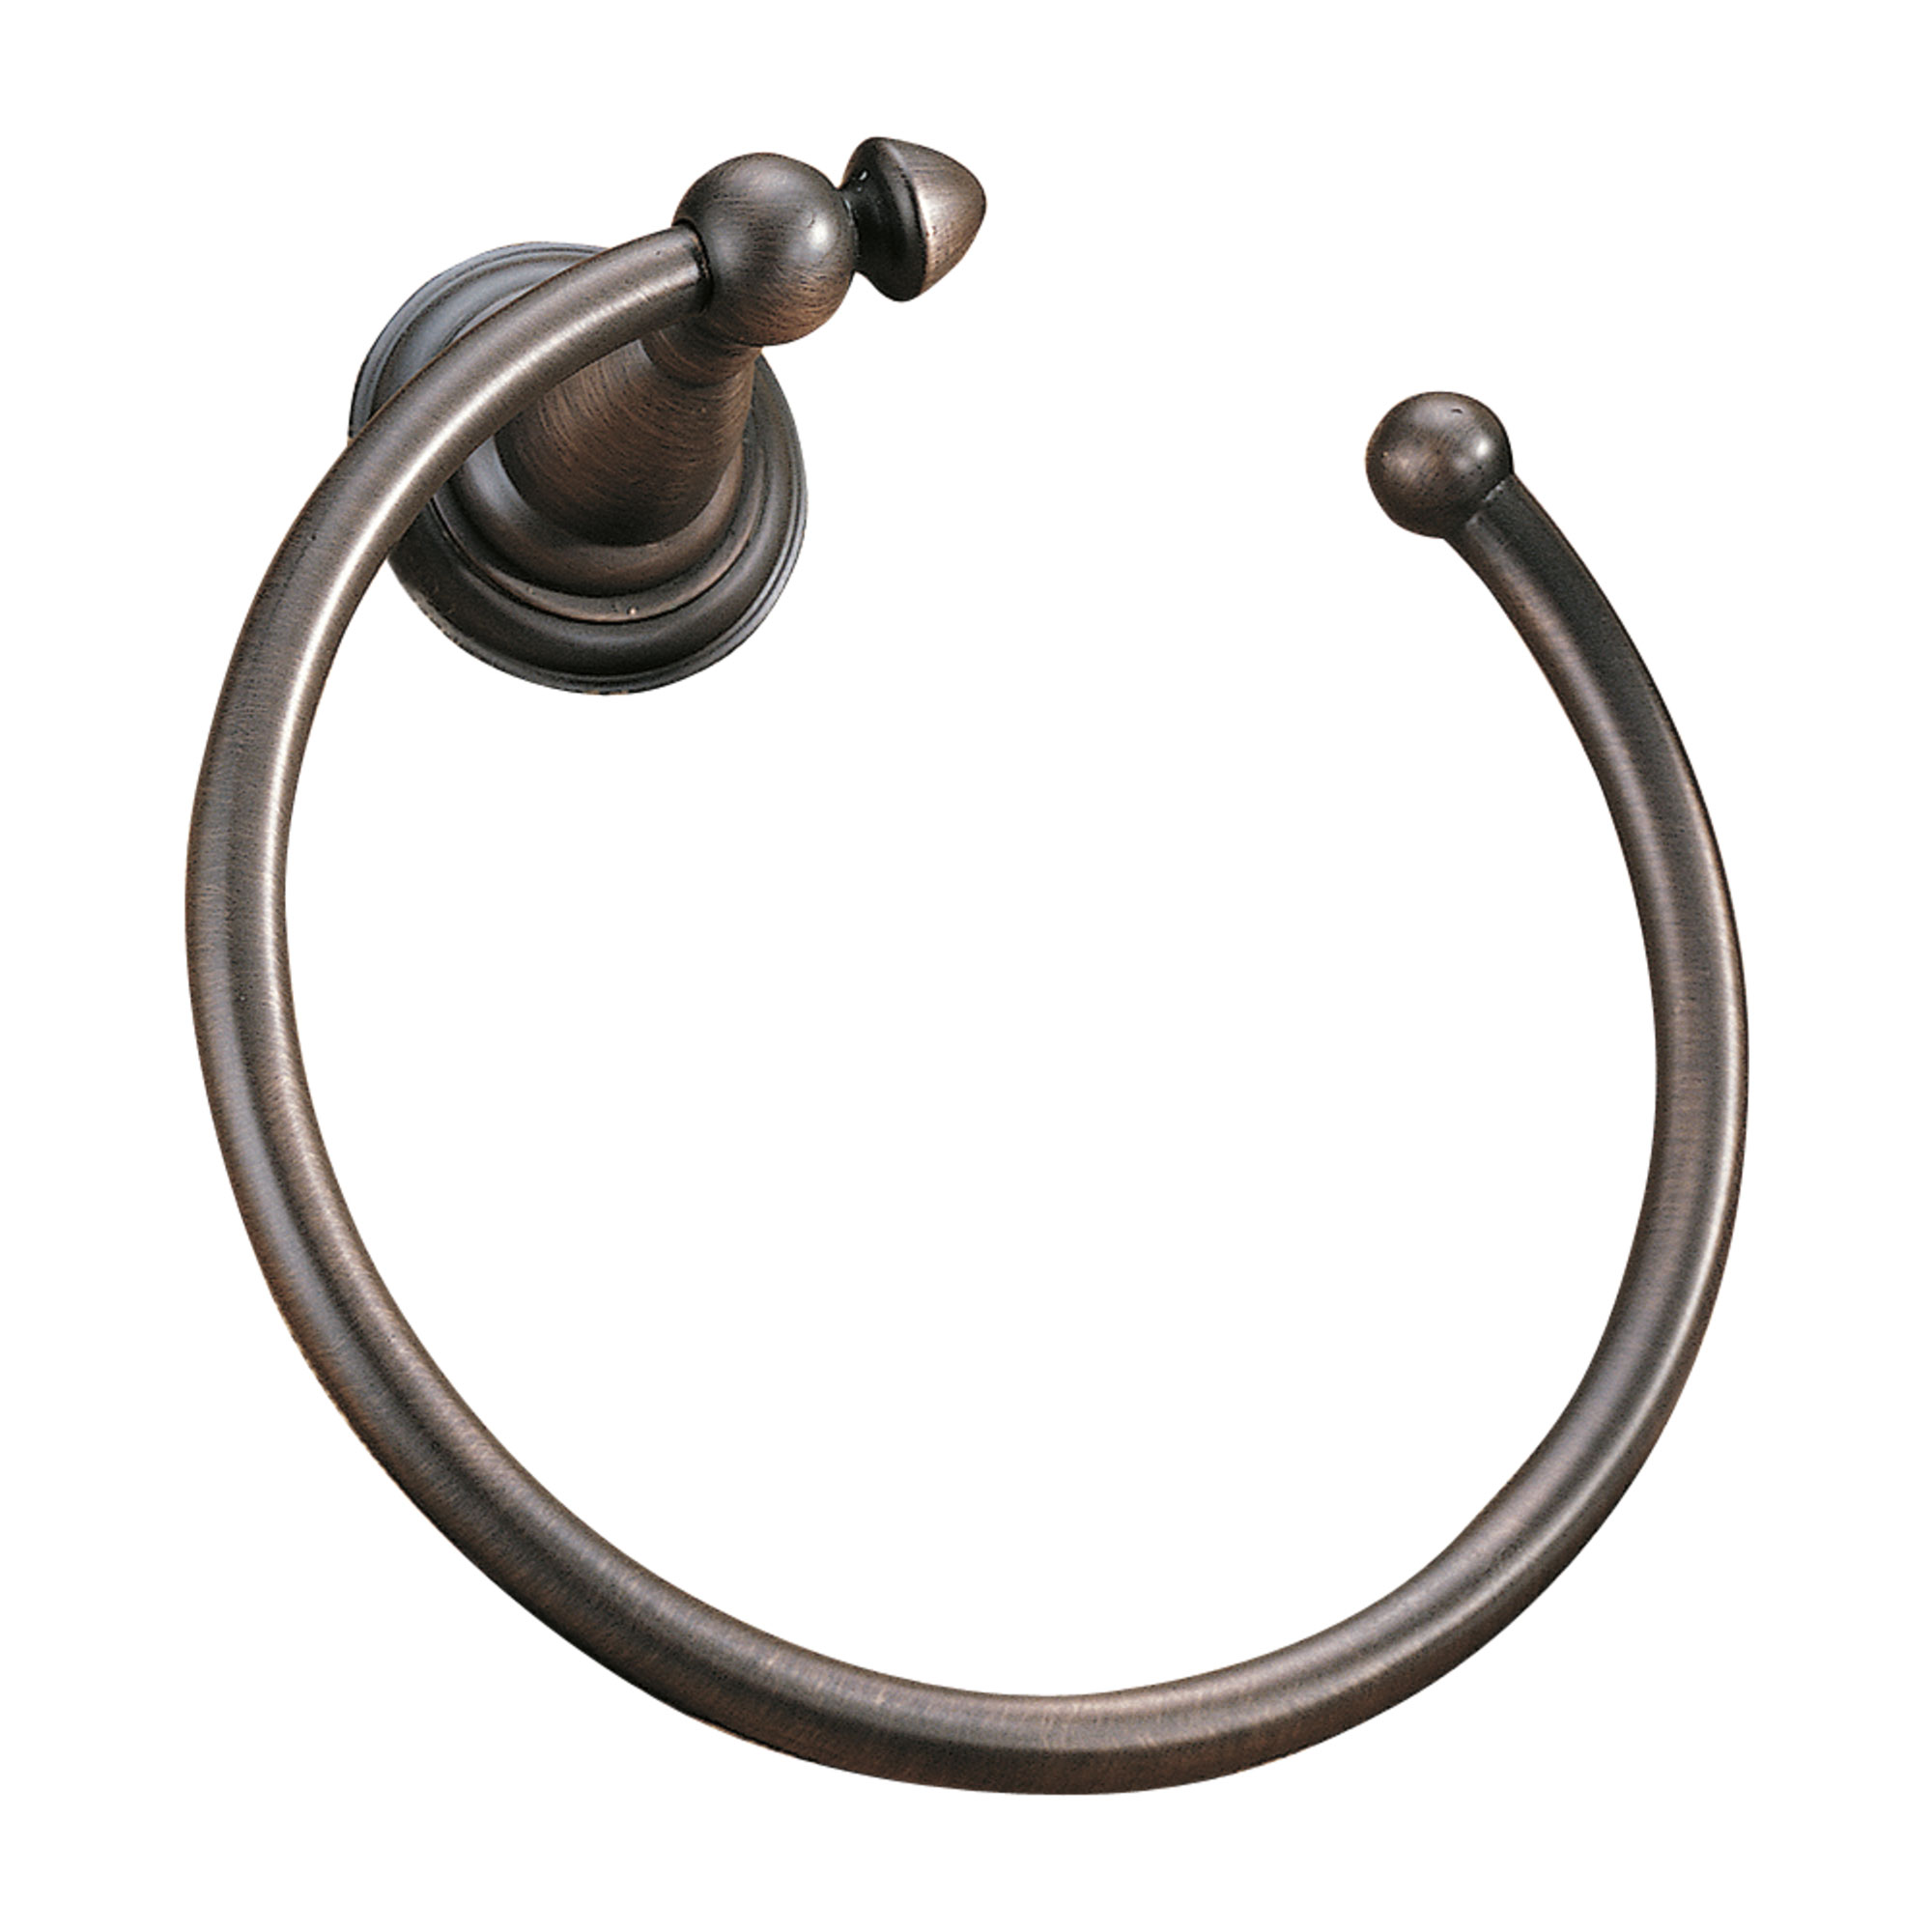 Towel Ring in Polished Brass 75046-PB